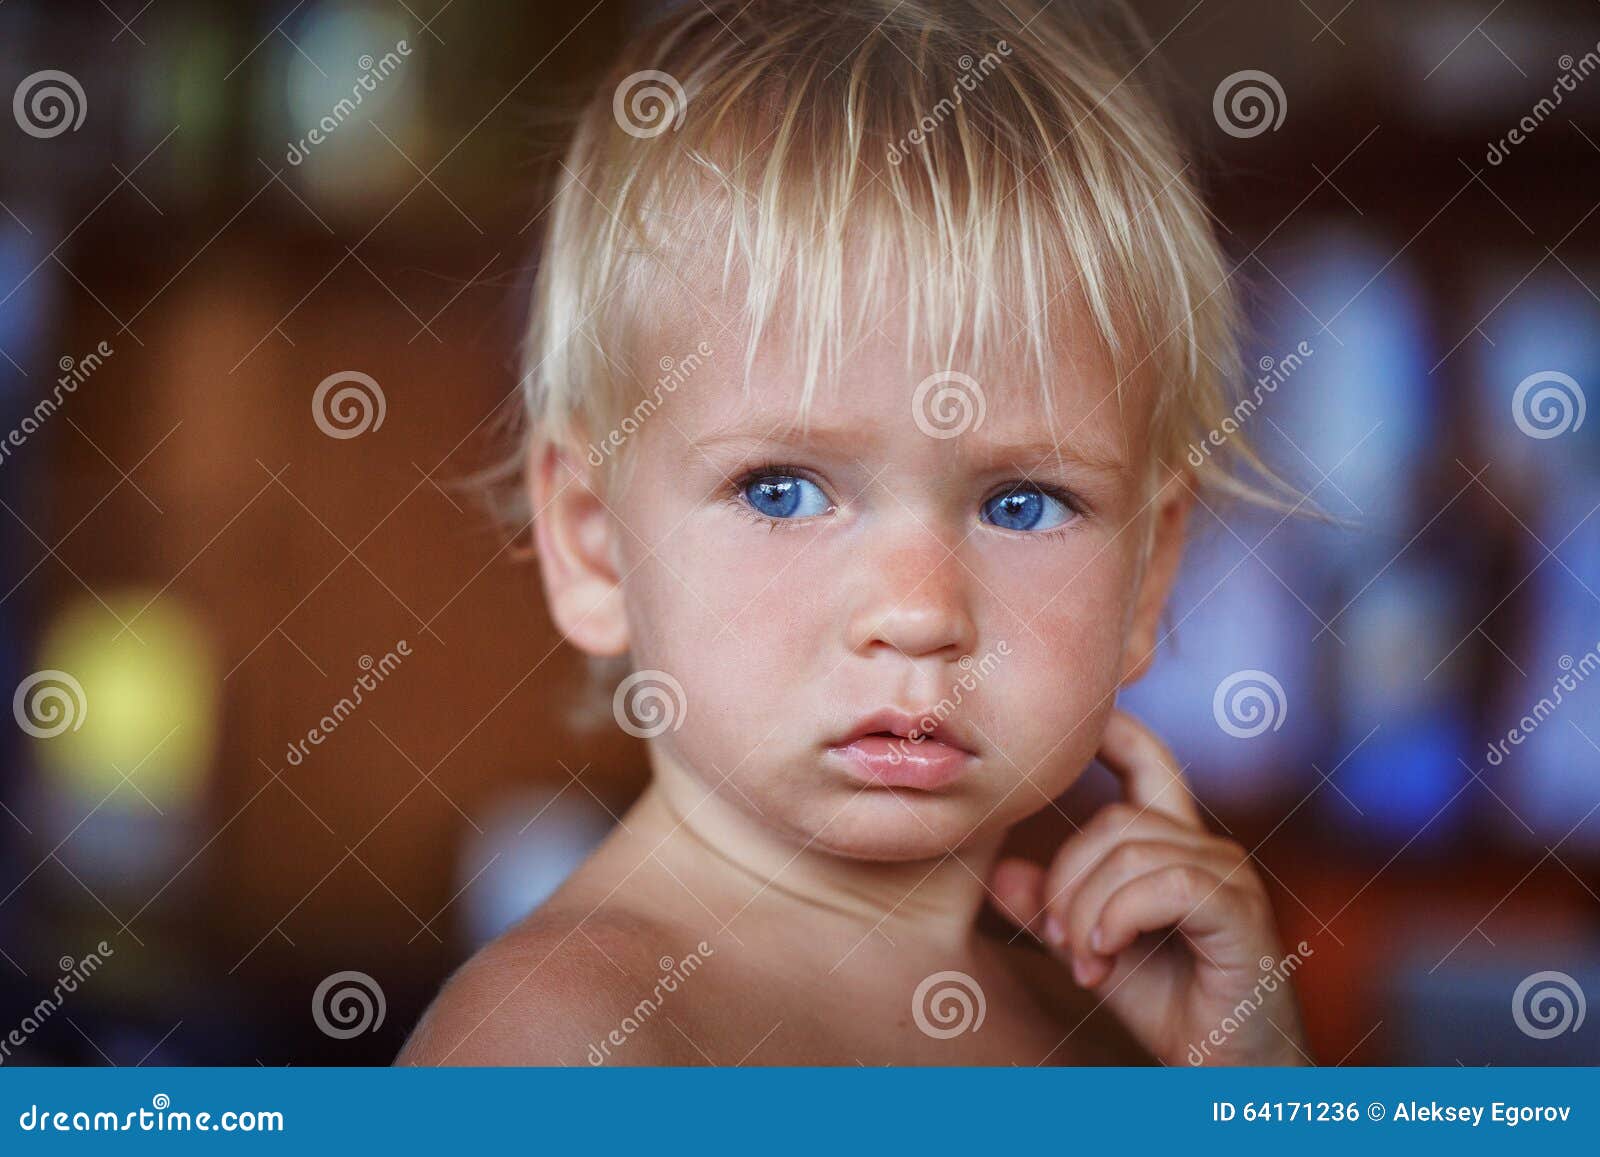 2. Young boy with blonde hair and blue eyes - wide 9